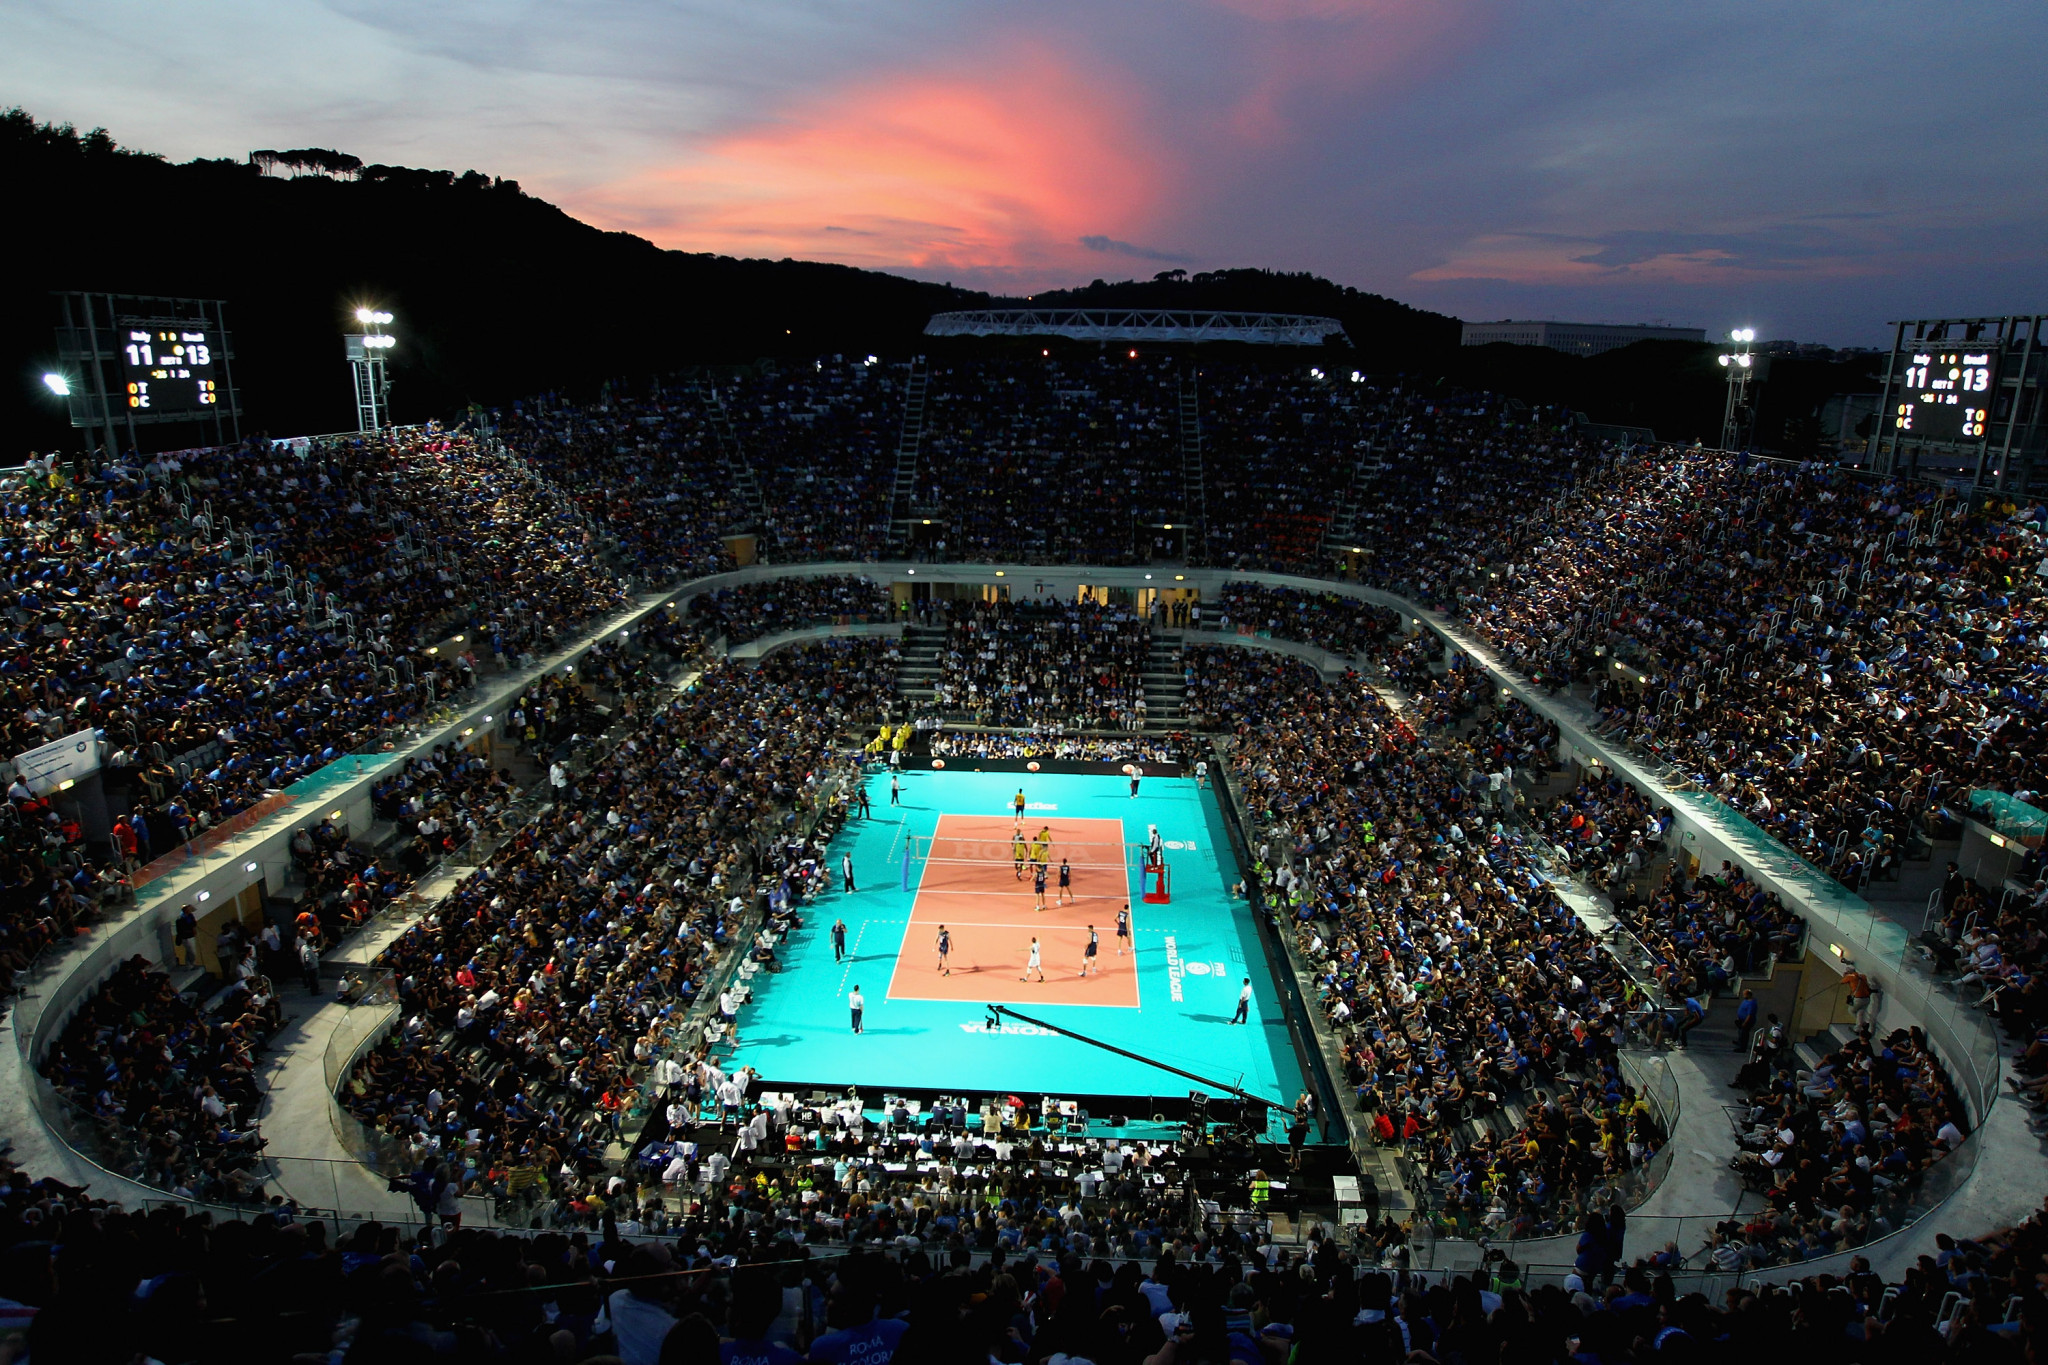 Foro Italico has hosted volleyball events on multiple occasions before ©Getty Images